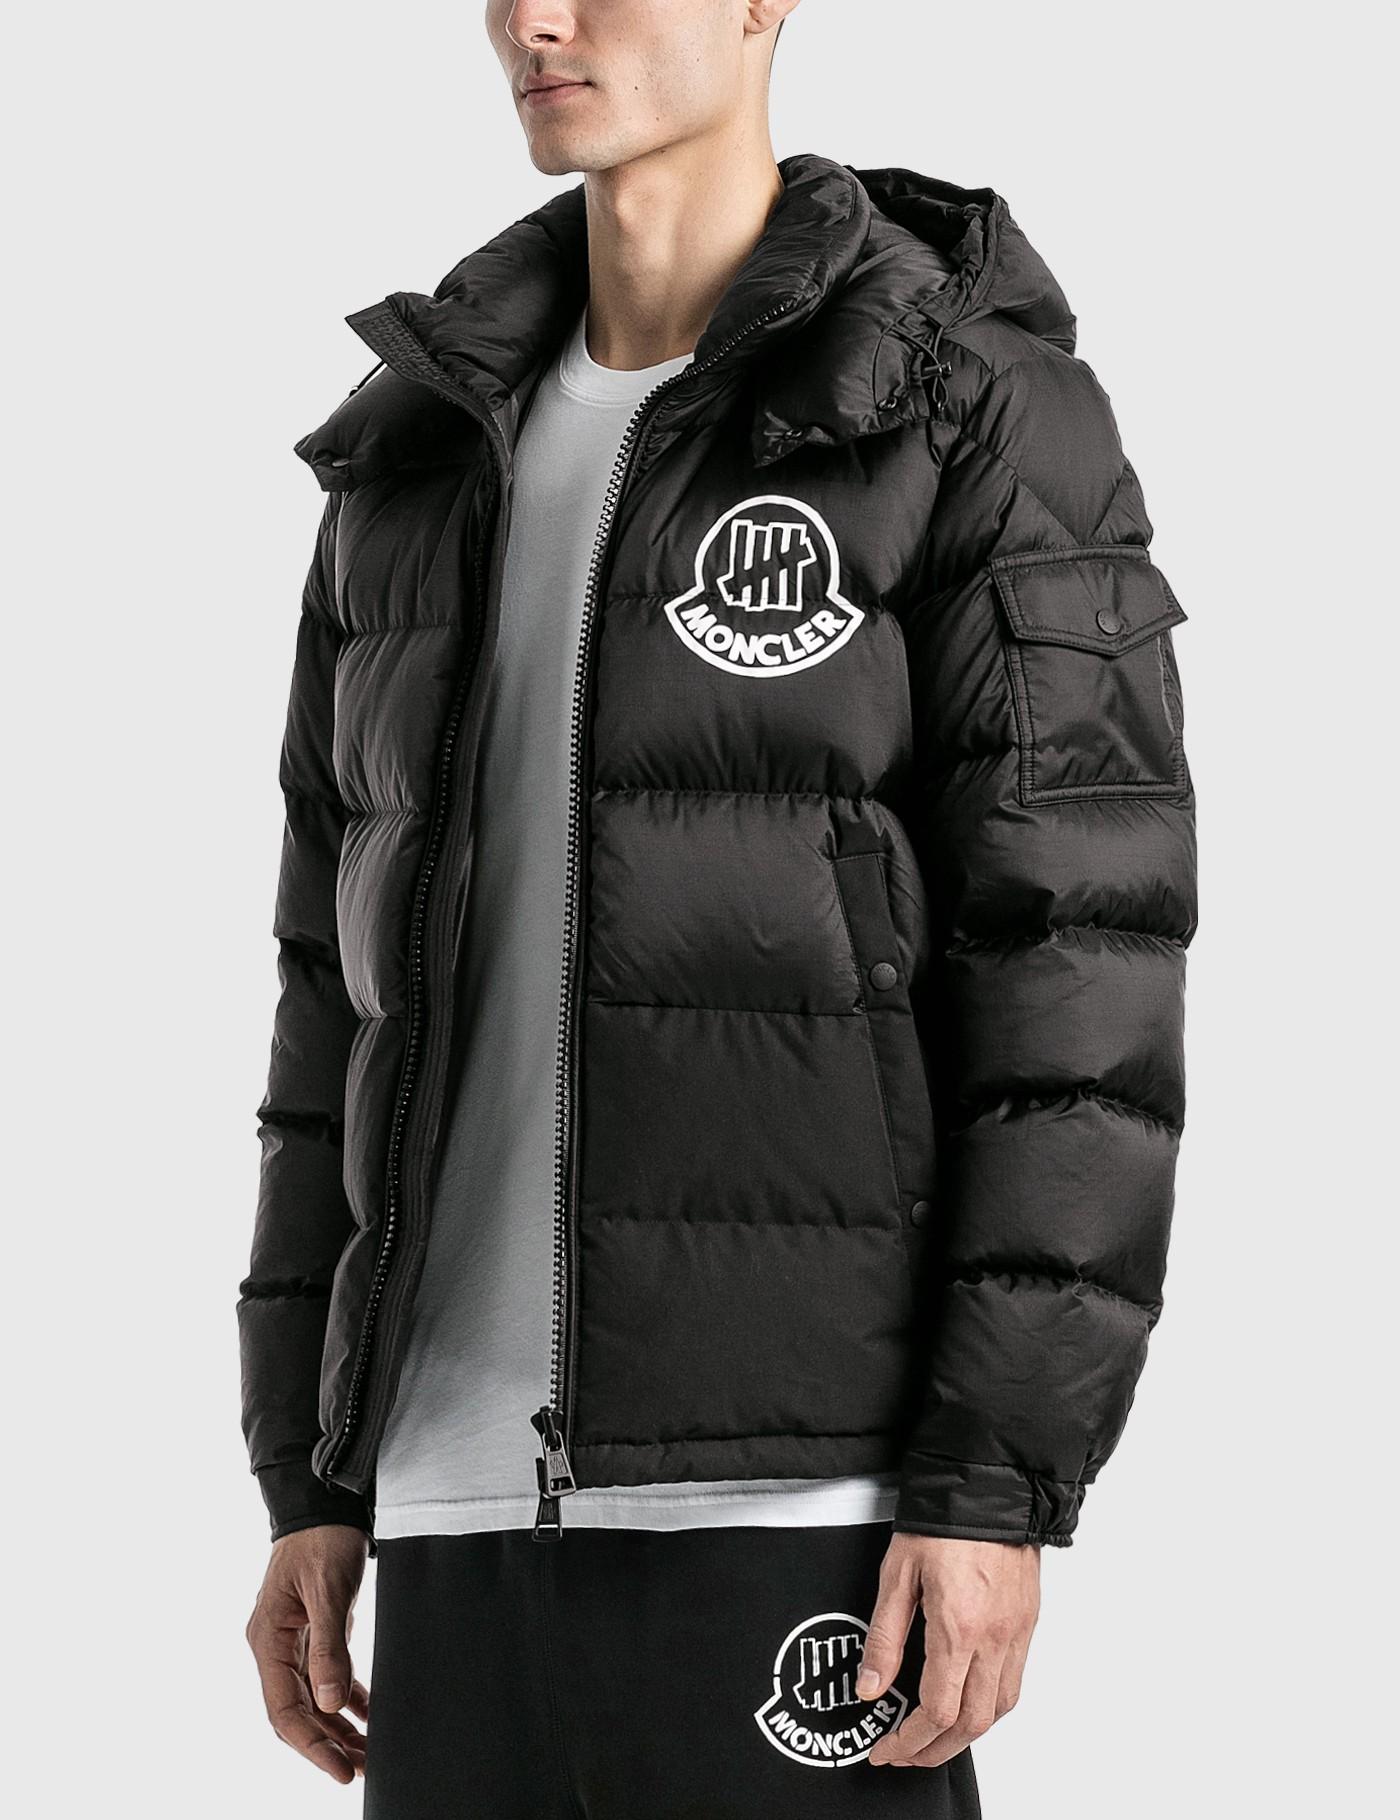 Moncler Genius 1952 X Undefeated Arensky Jacket in Black for Men - Lyst